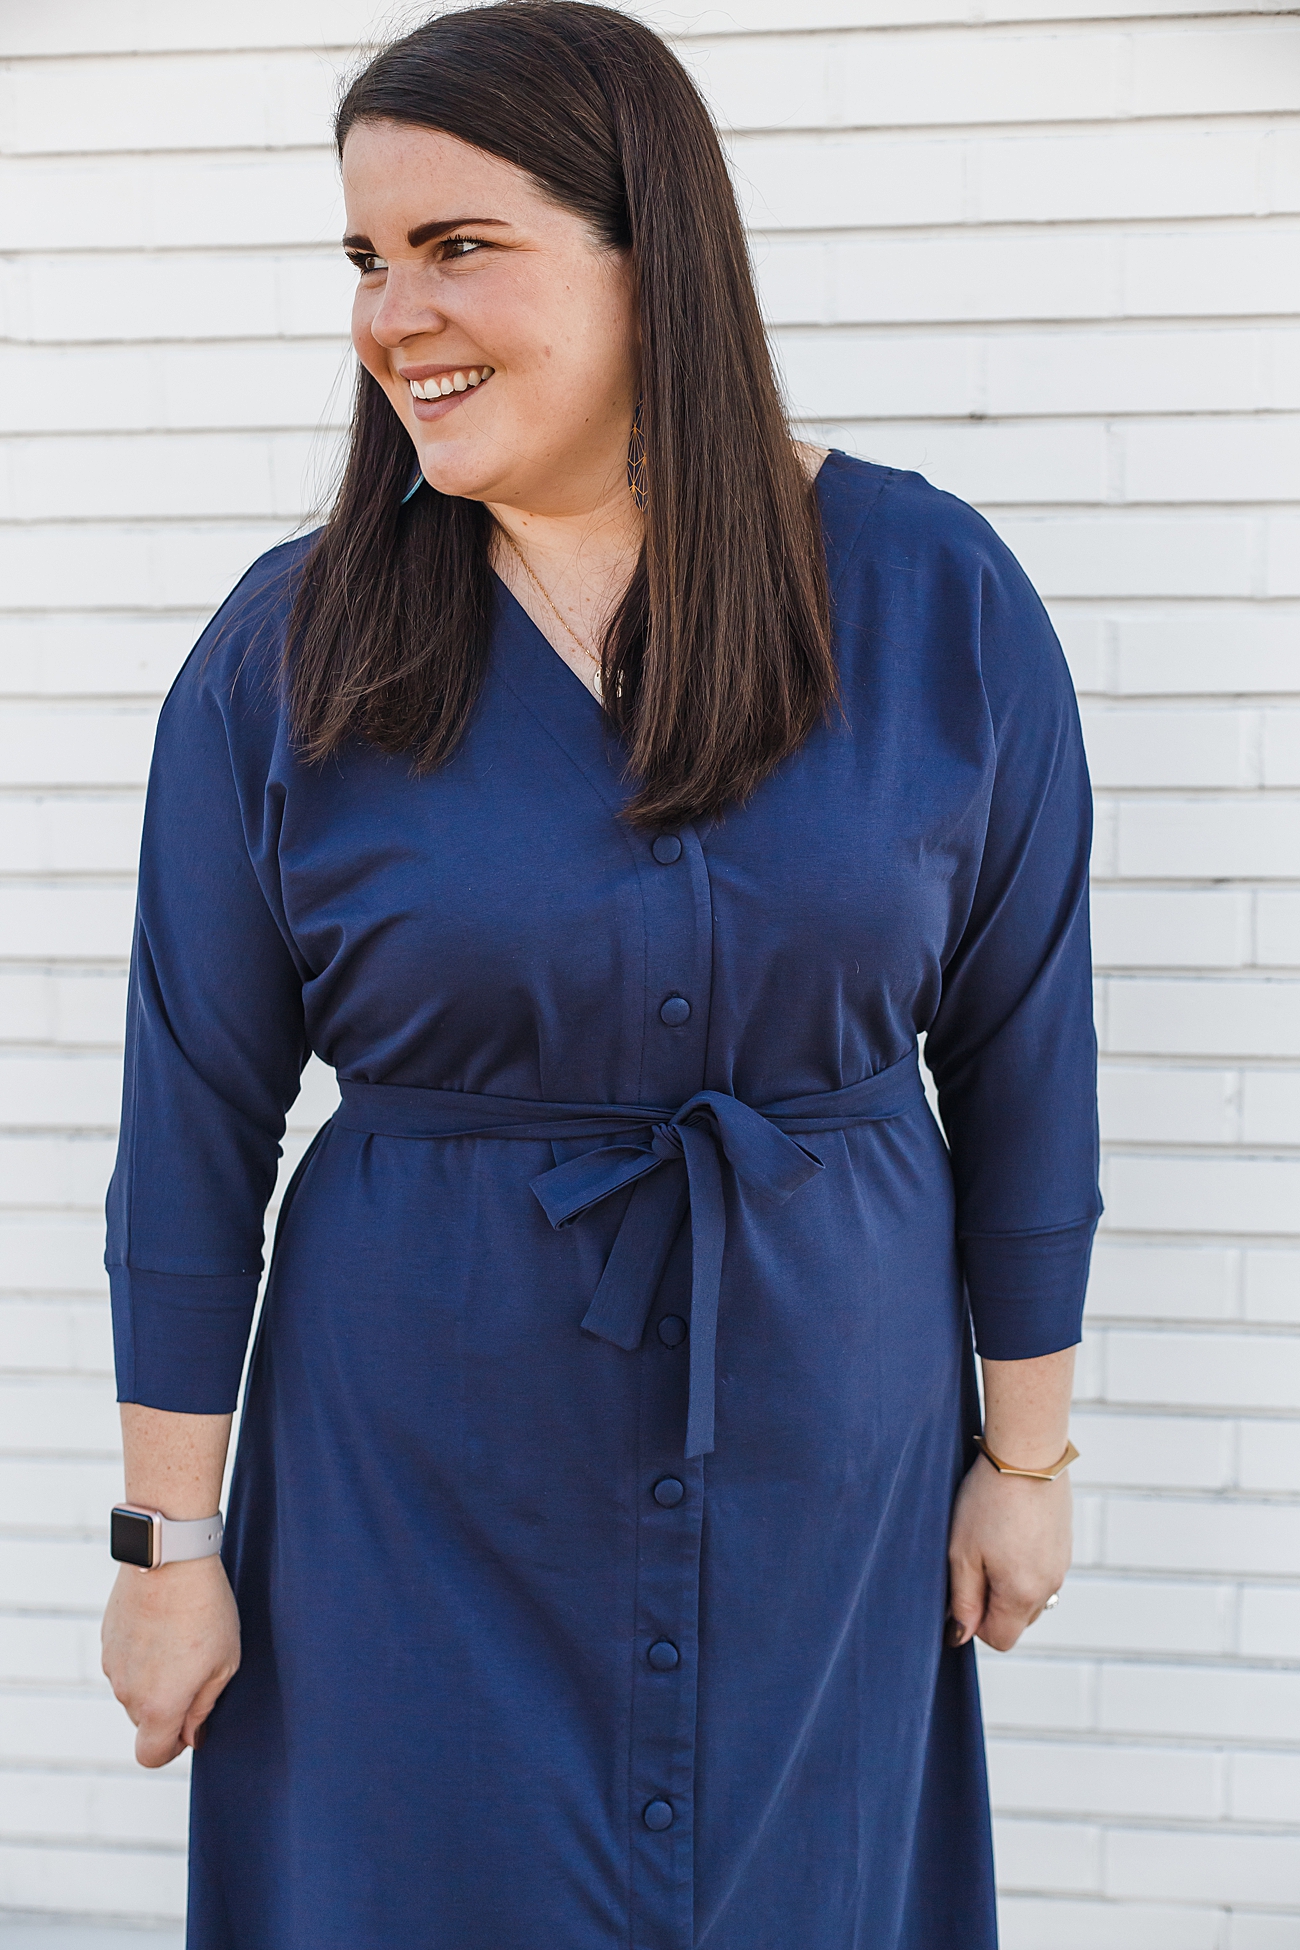 The Elegantees "Molly" Dress is Here! | Beautiful, versatile, ethically made dress (26)